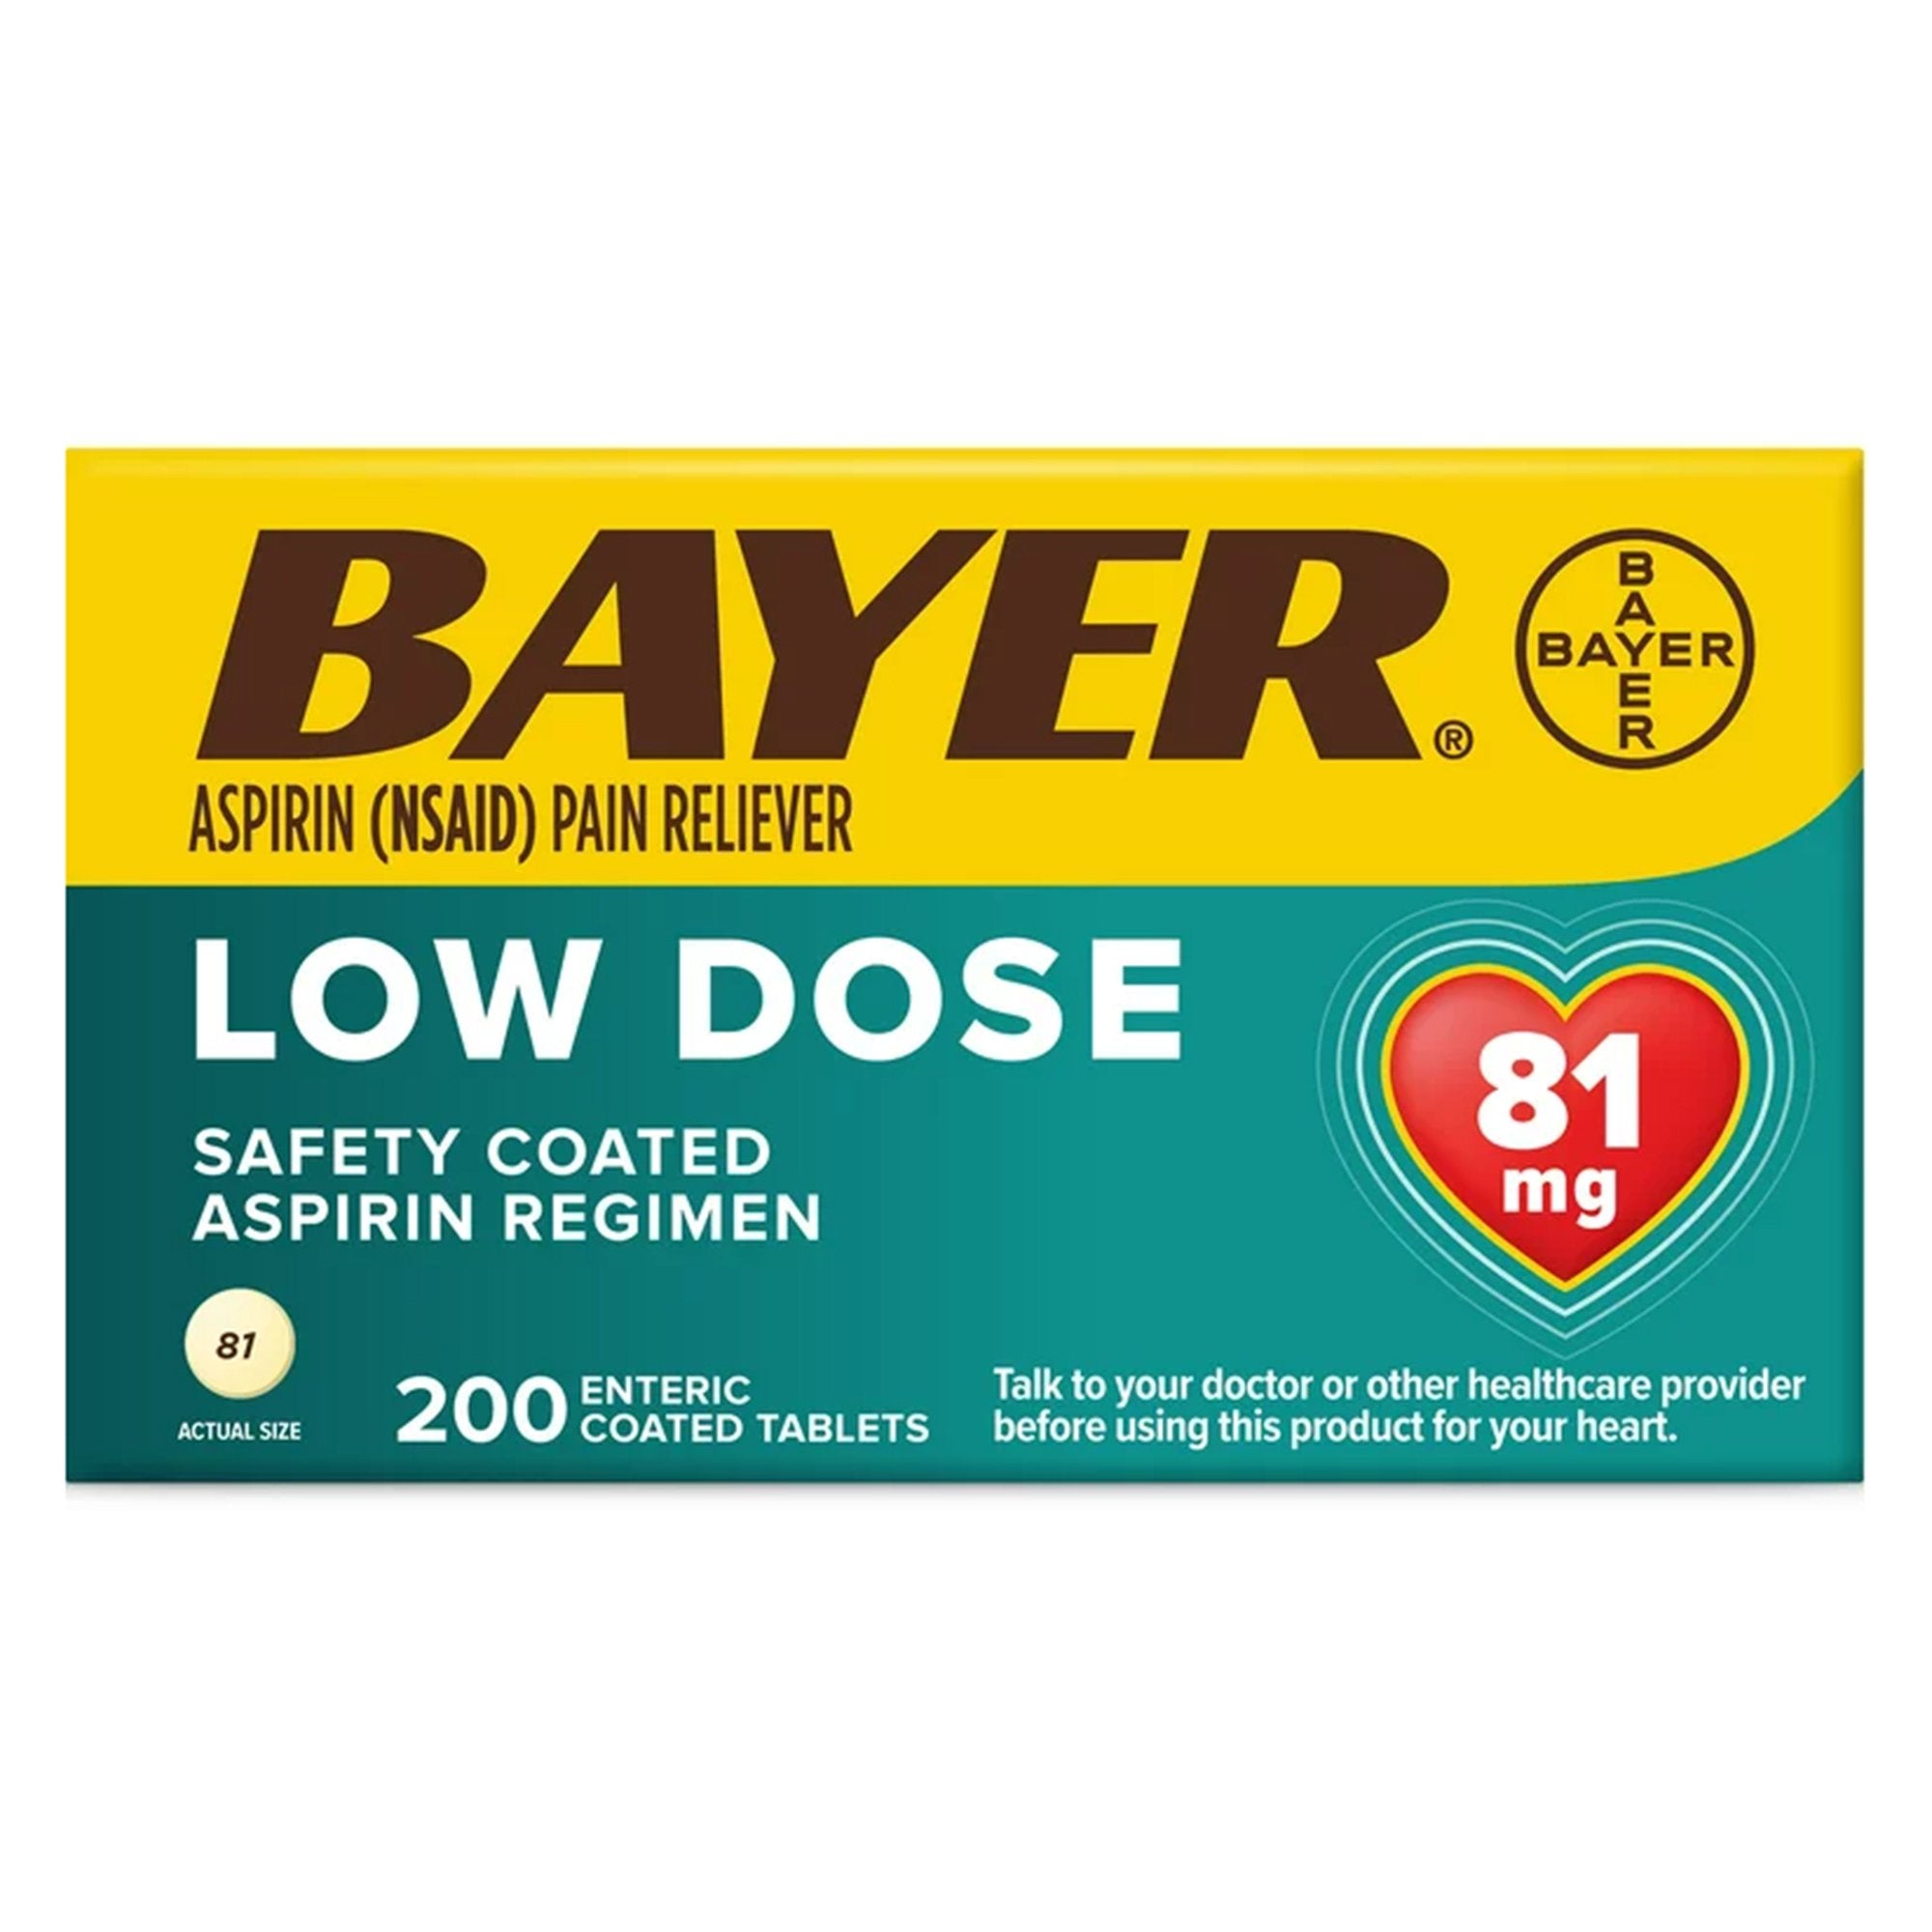 Bayer Low Dose Safety Coated Aspirin 81 mg Tablets (1 Unit)